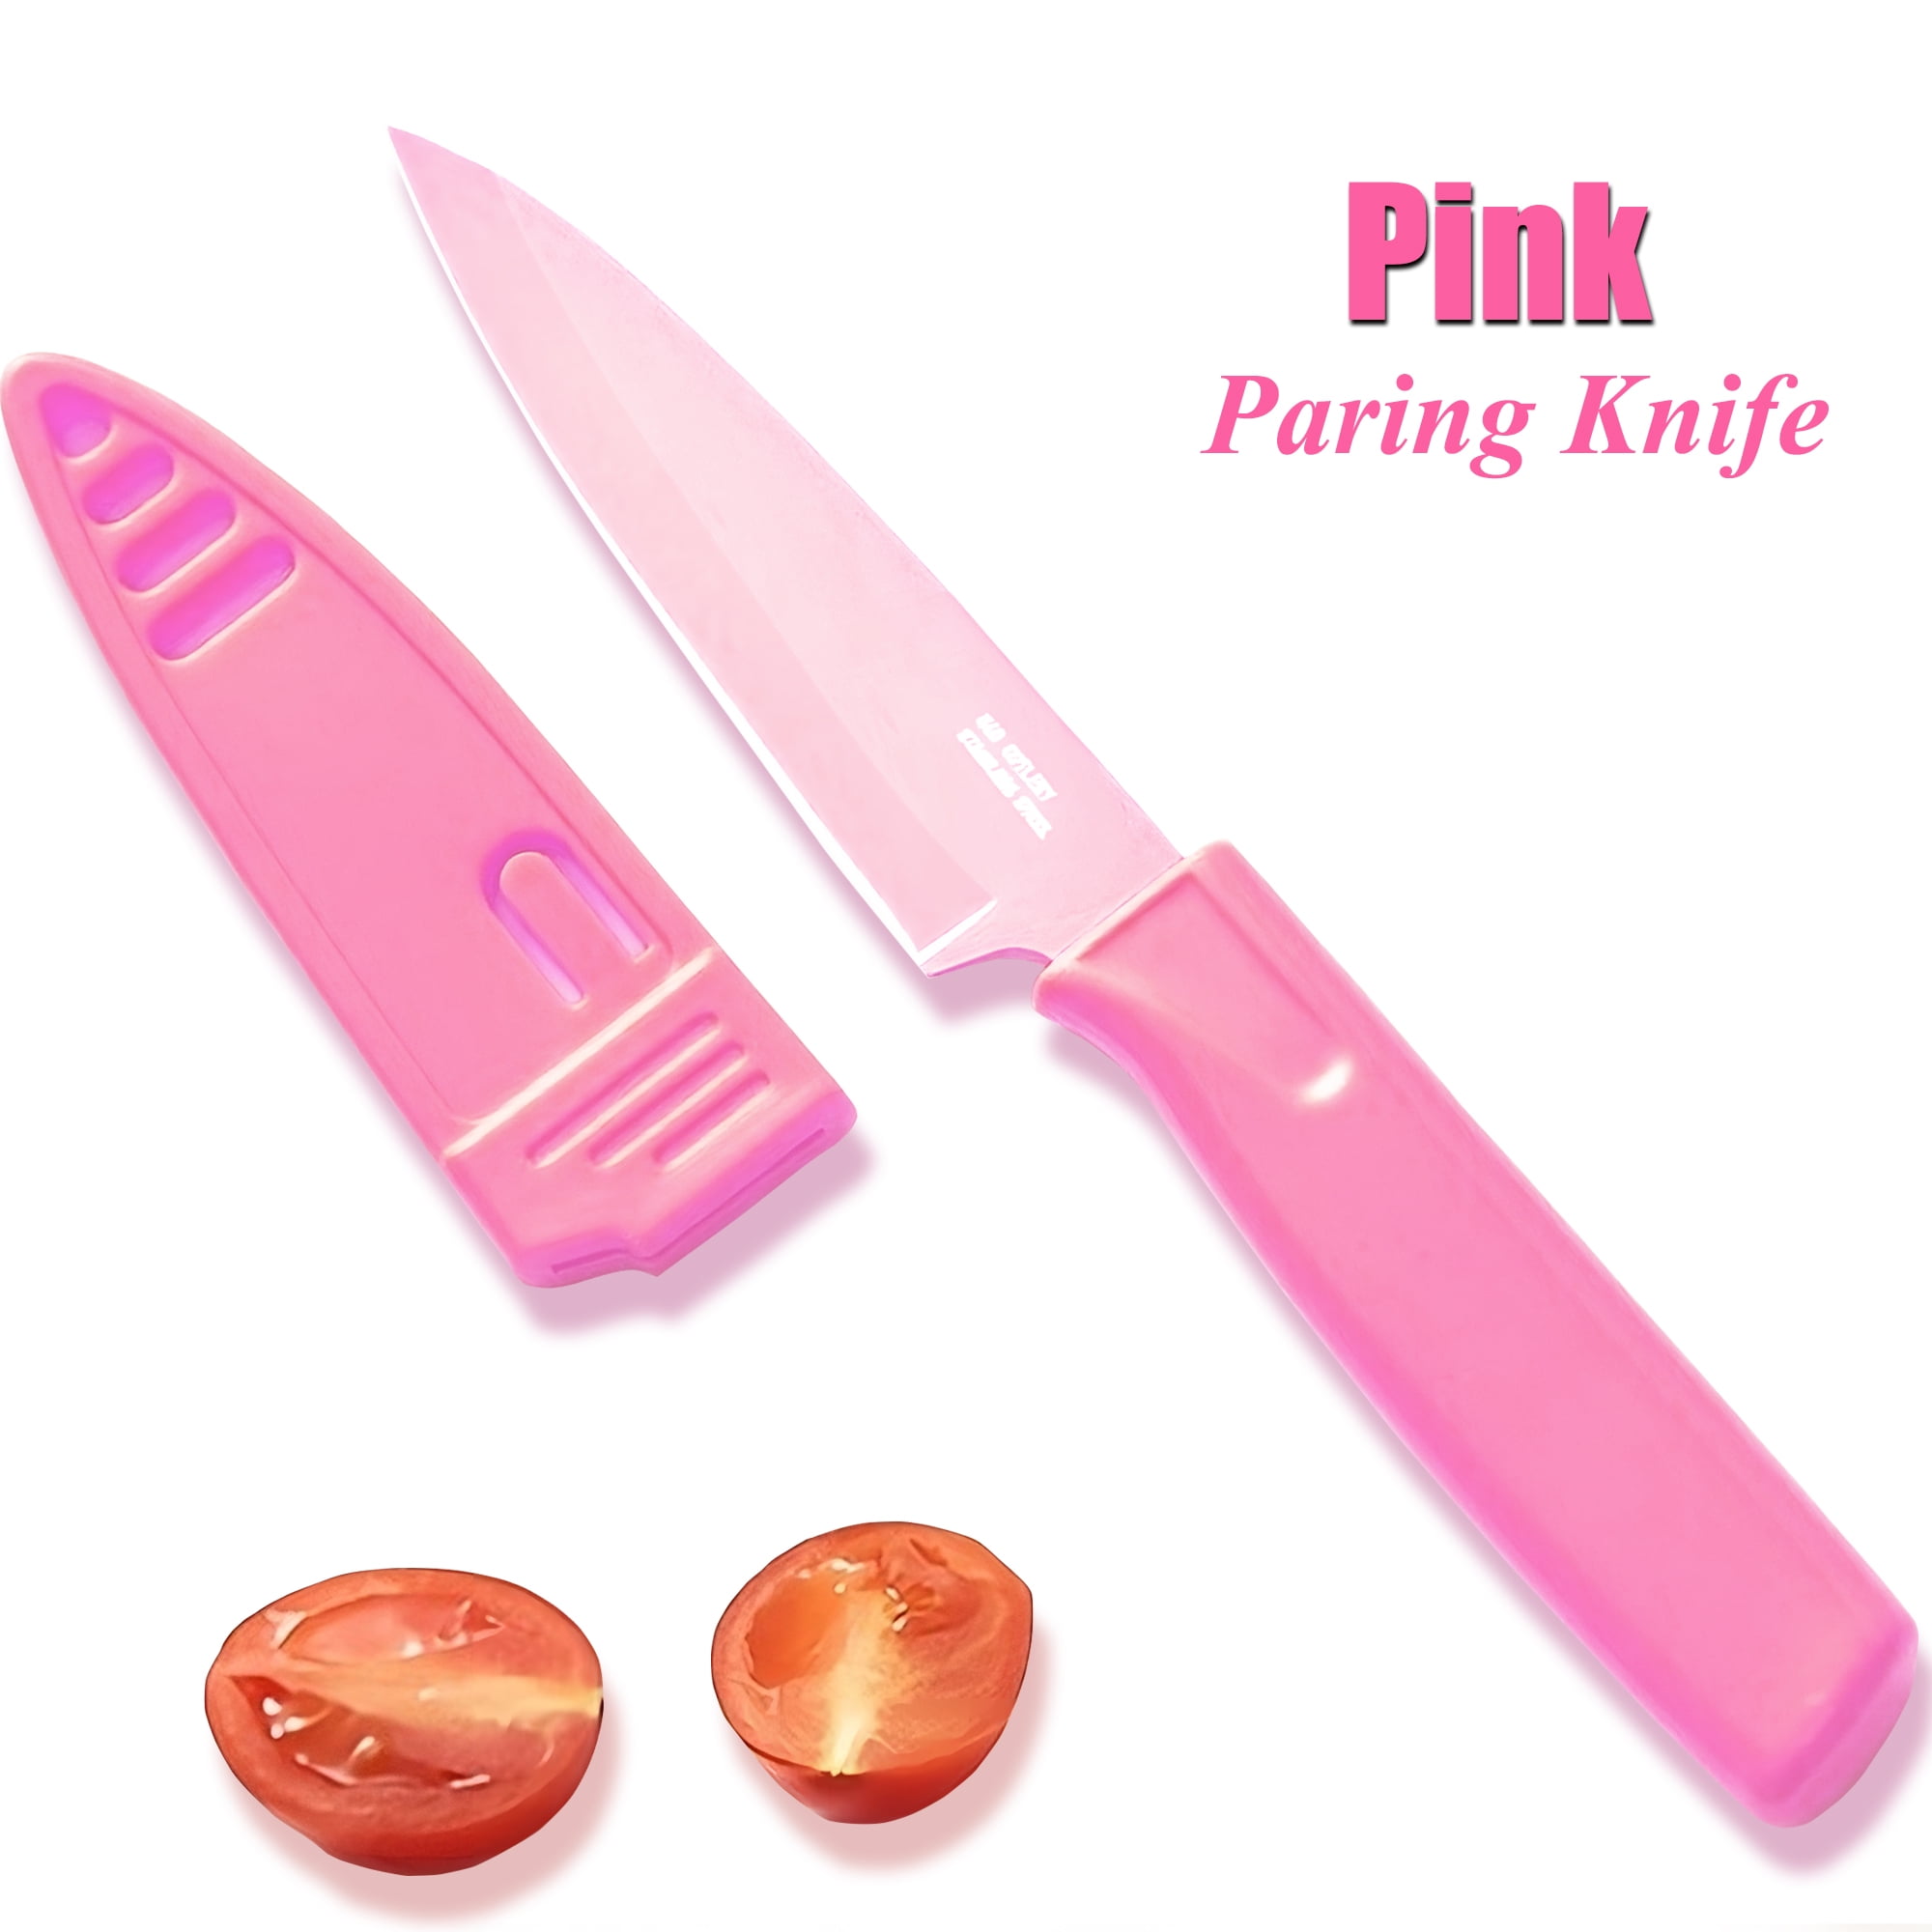 VITUER Paring knife, 4PCS Paring knives (4 Knives and 4 Knife cover), 4  Inch Peeling Knife, Fruit and Vegetable Knife, Ultra Sharp Kitchen Knives